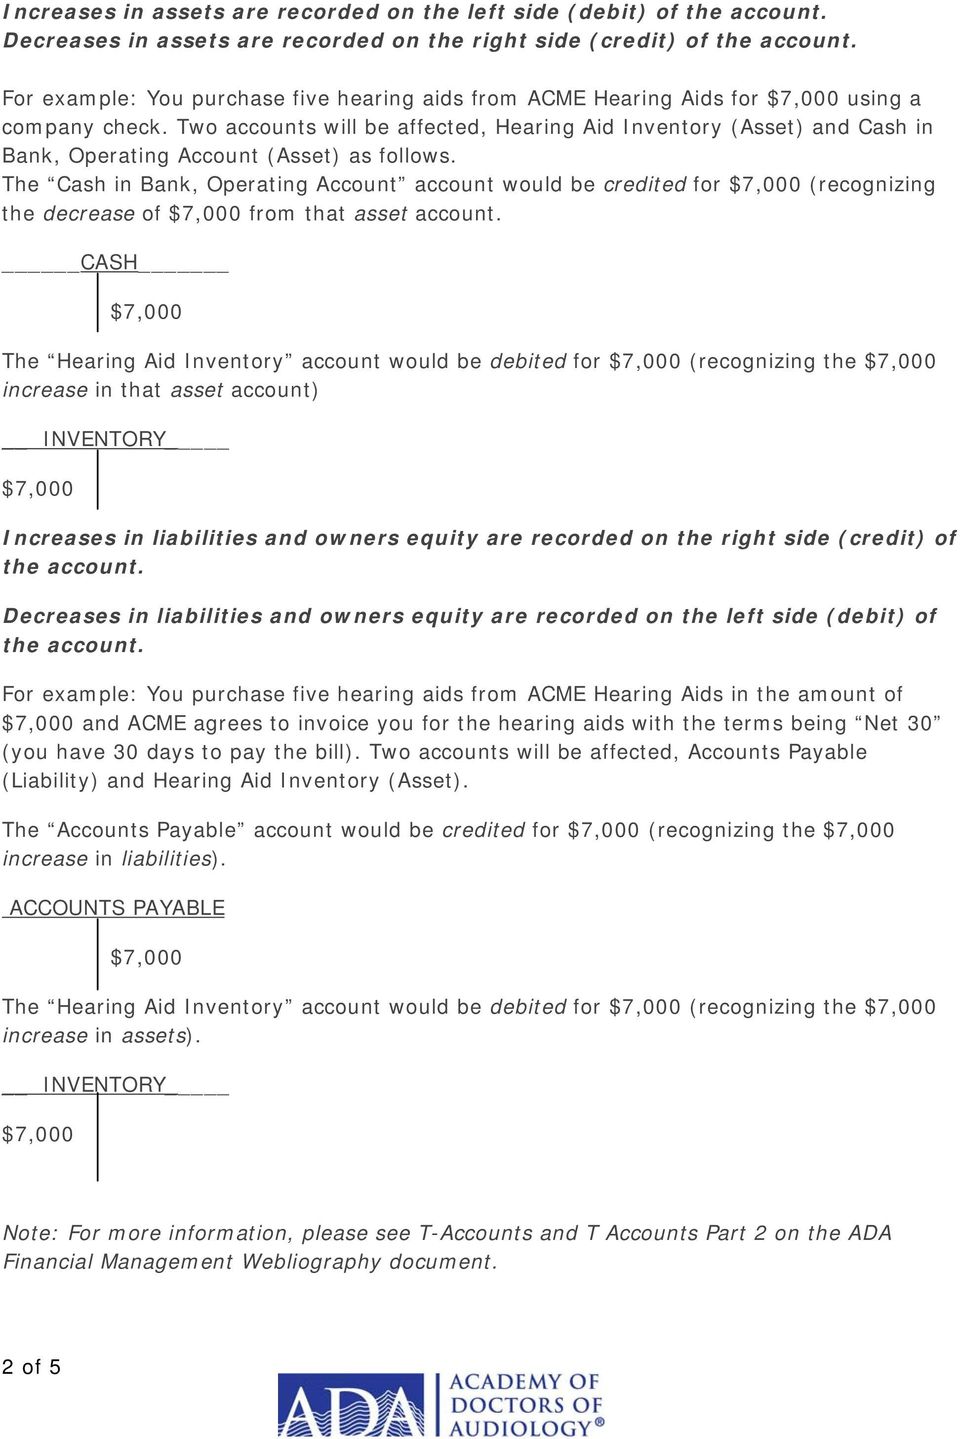 Two accounts will be affected, Hearing Aid Inventory (Asset) and Cash in Bank, Operating Account (Asset) as follows.